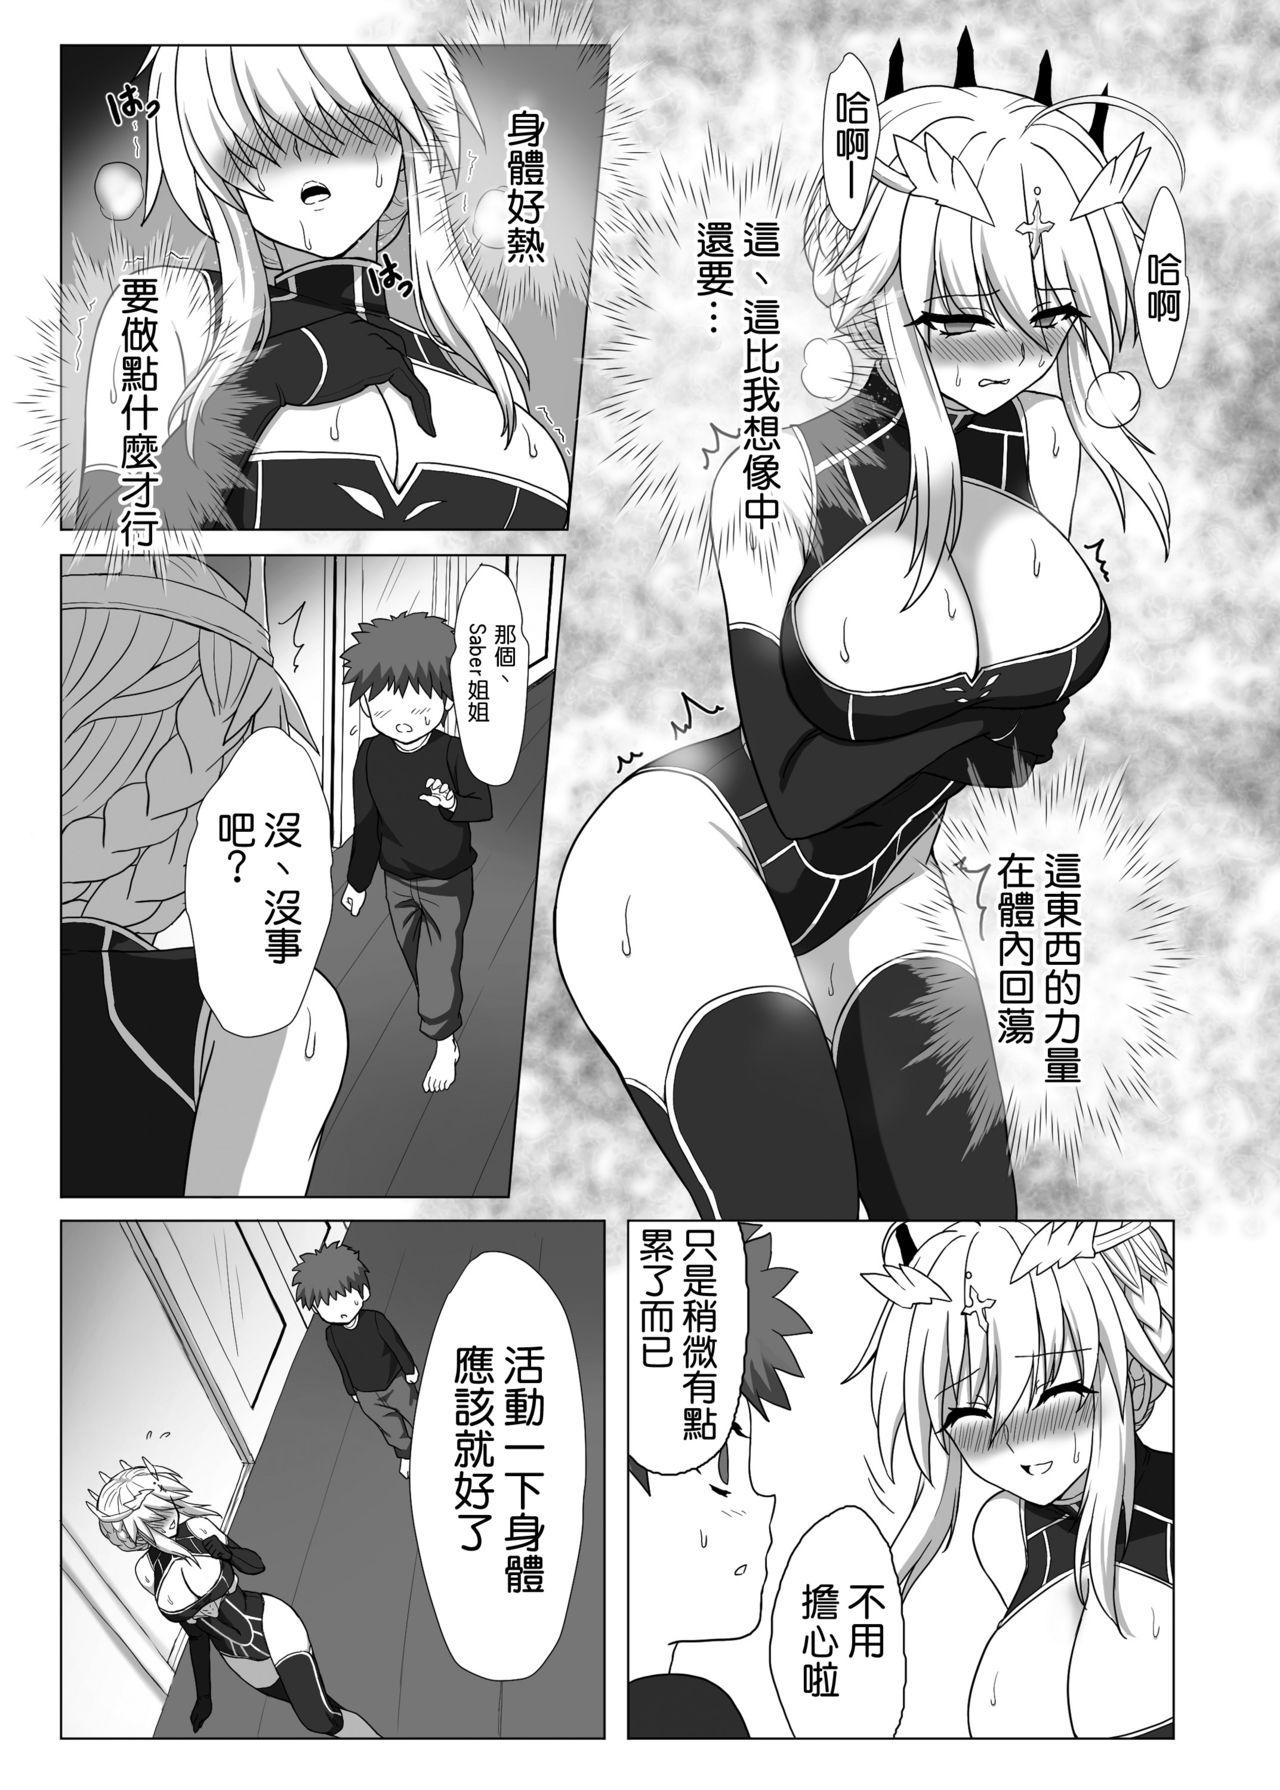 Exgf Fate/NTR - Fate grand order Rough Sex - Page 11